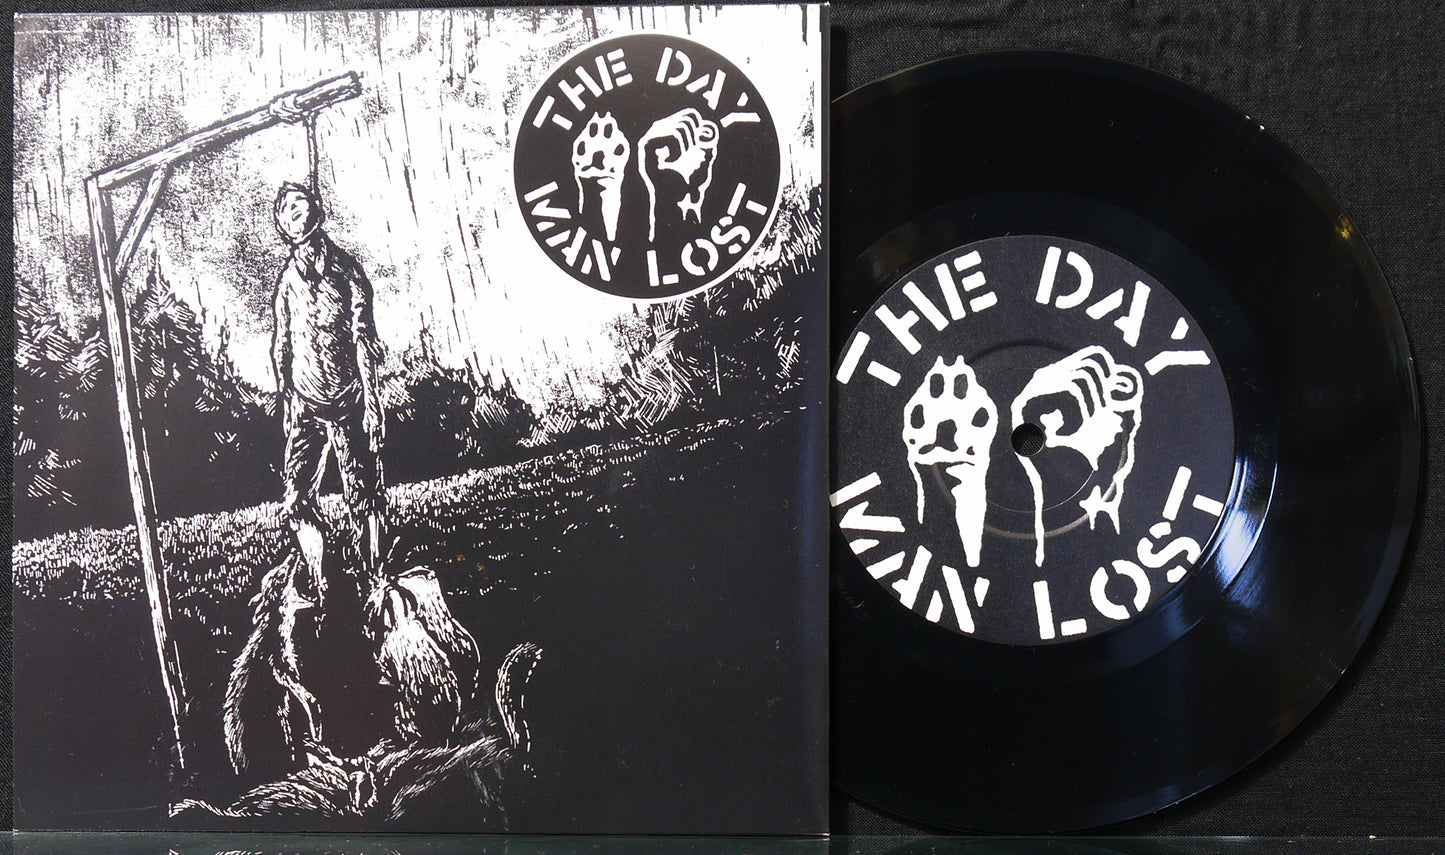 THE DAY MAN LOST / PROLEFEED - Split 7"